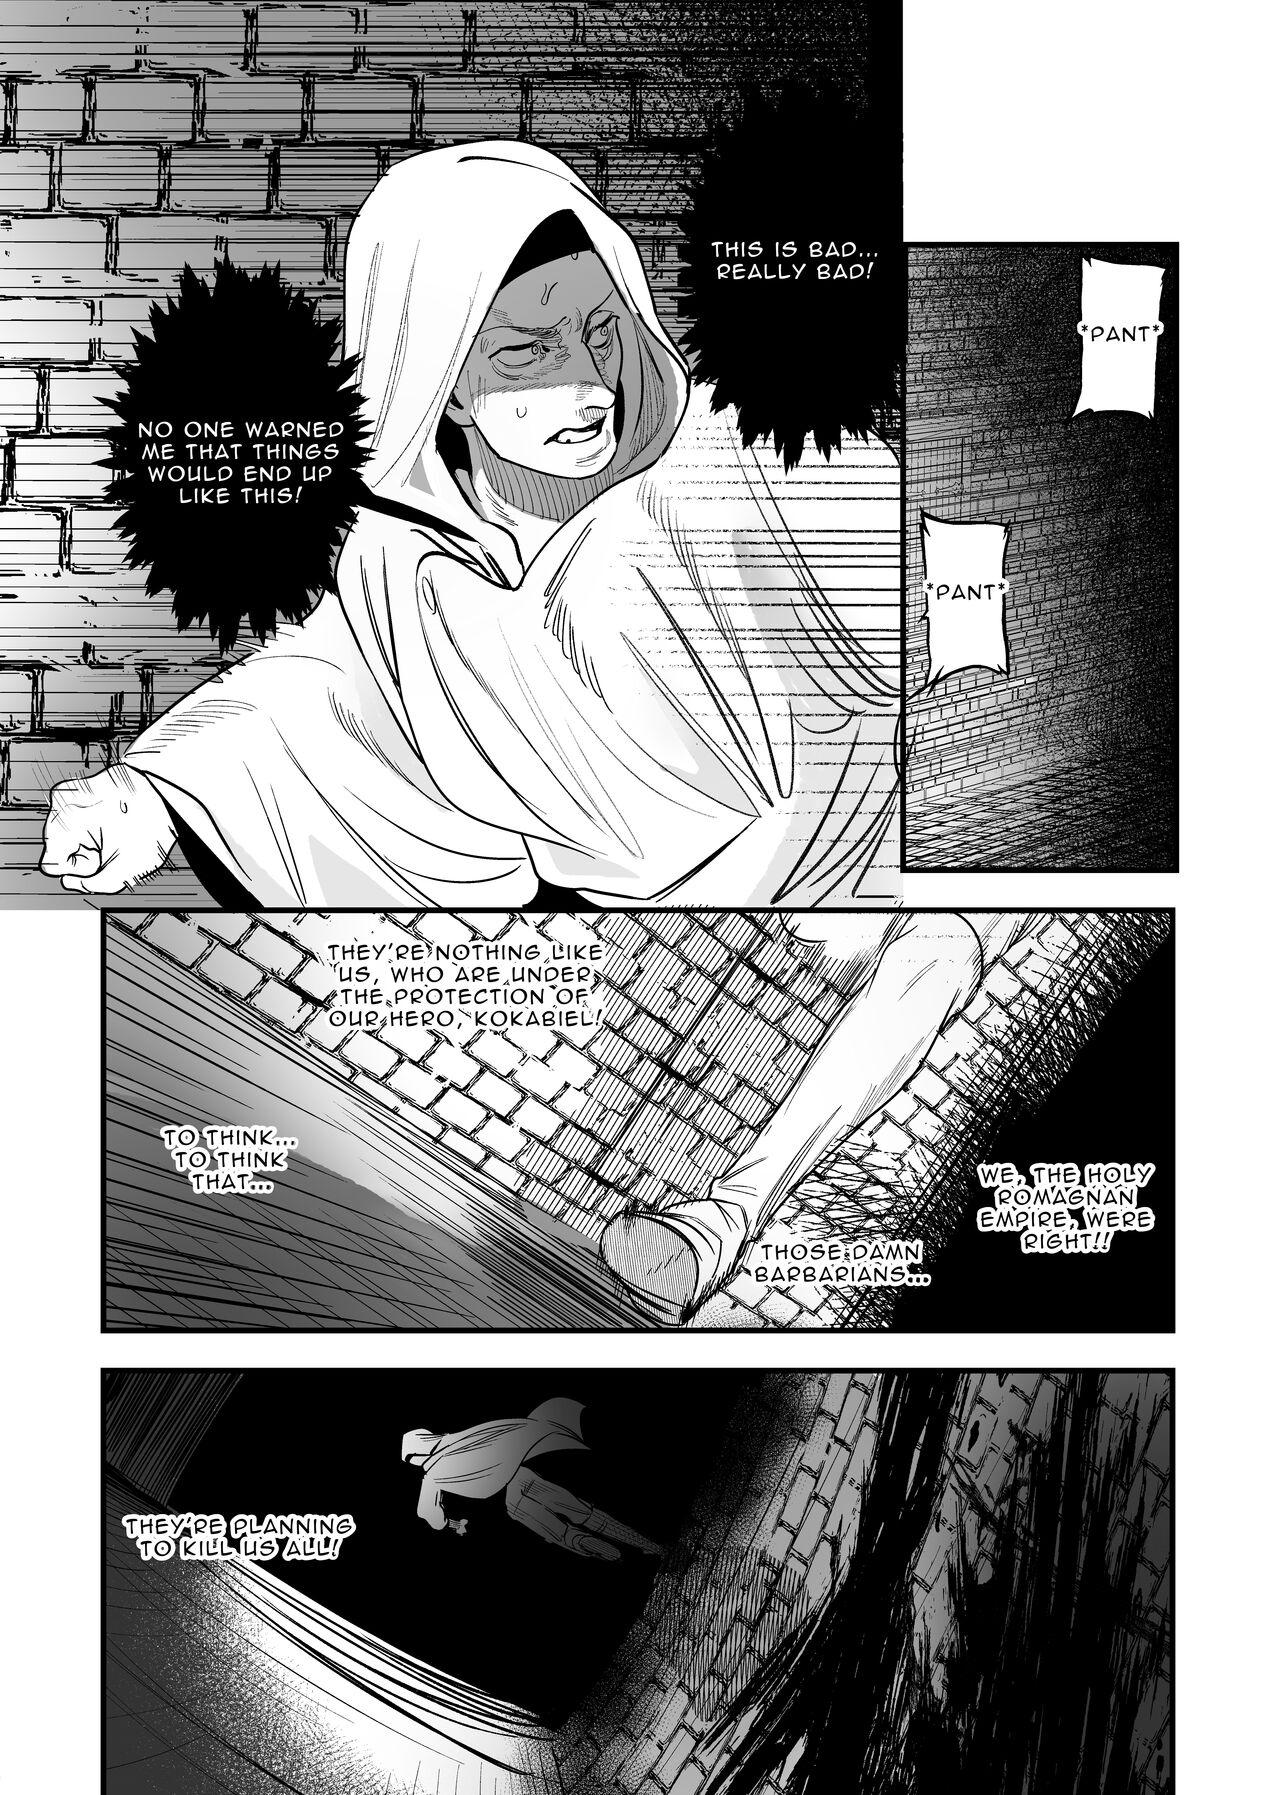 Naked Sluts The Man Who Saved Me on my Isekai Trip was a Killer... 2 - Original Roludo - Page 3